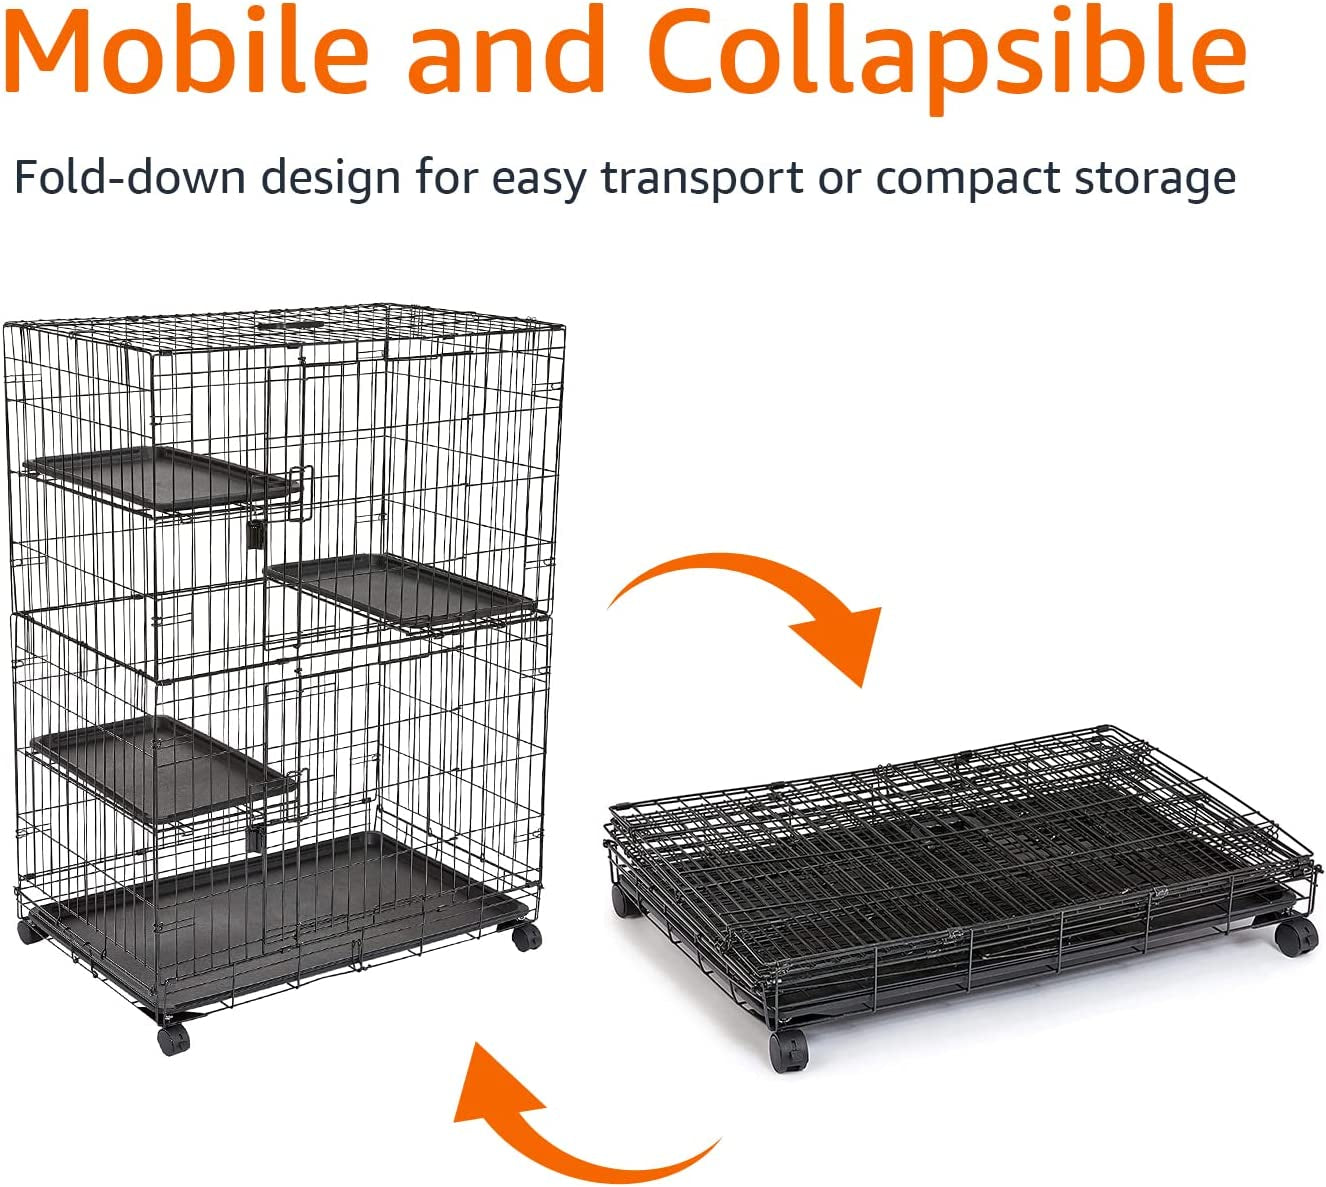 Large 3-Tier Cat Durable,Pliable Cage Playpen Box Crate Kennel - 35.8"L X 22.4"W X 50.6"H, Black